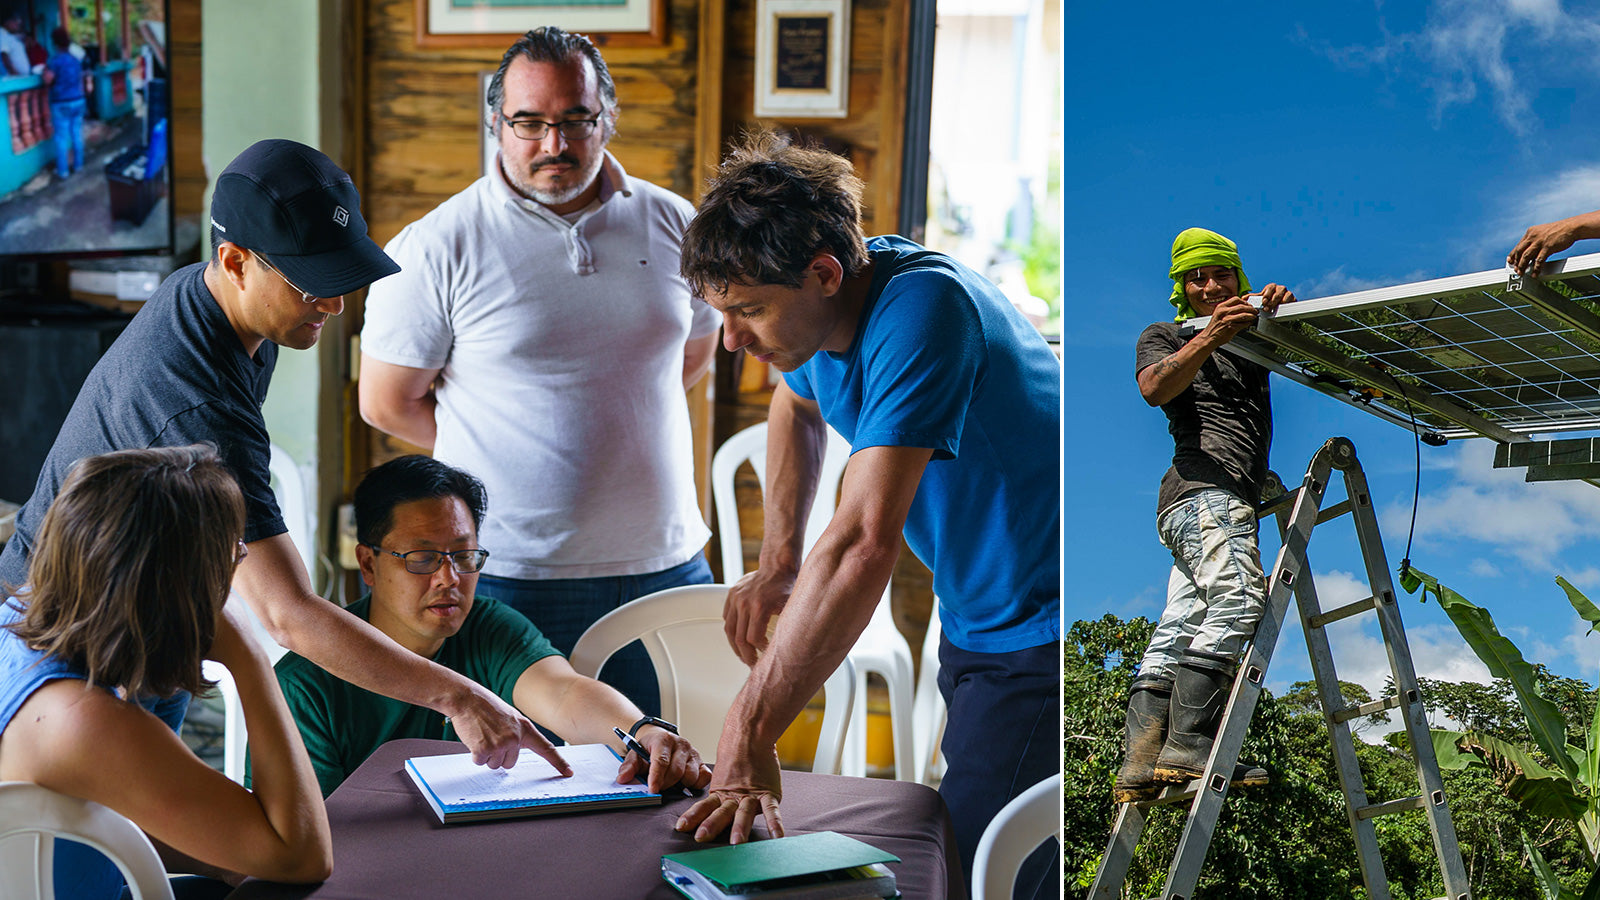 Left: Alex Honnold stands around a table with Honnold Foundation team members. Right: Two mean install a solar panel.